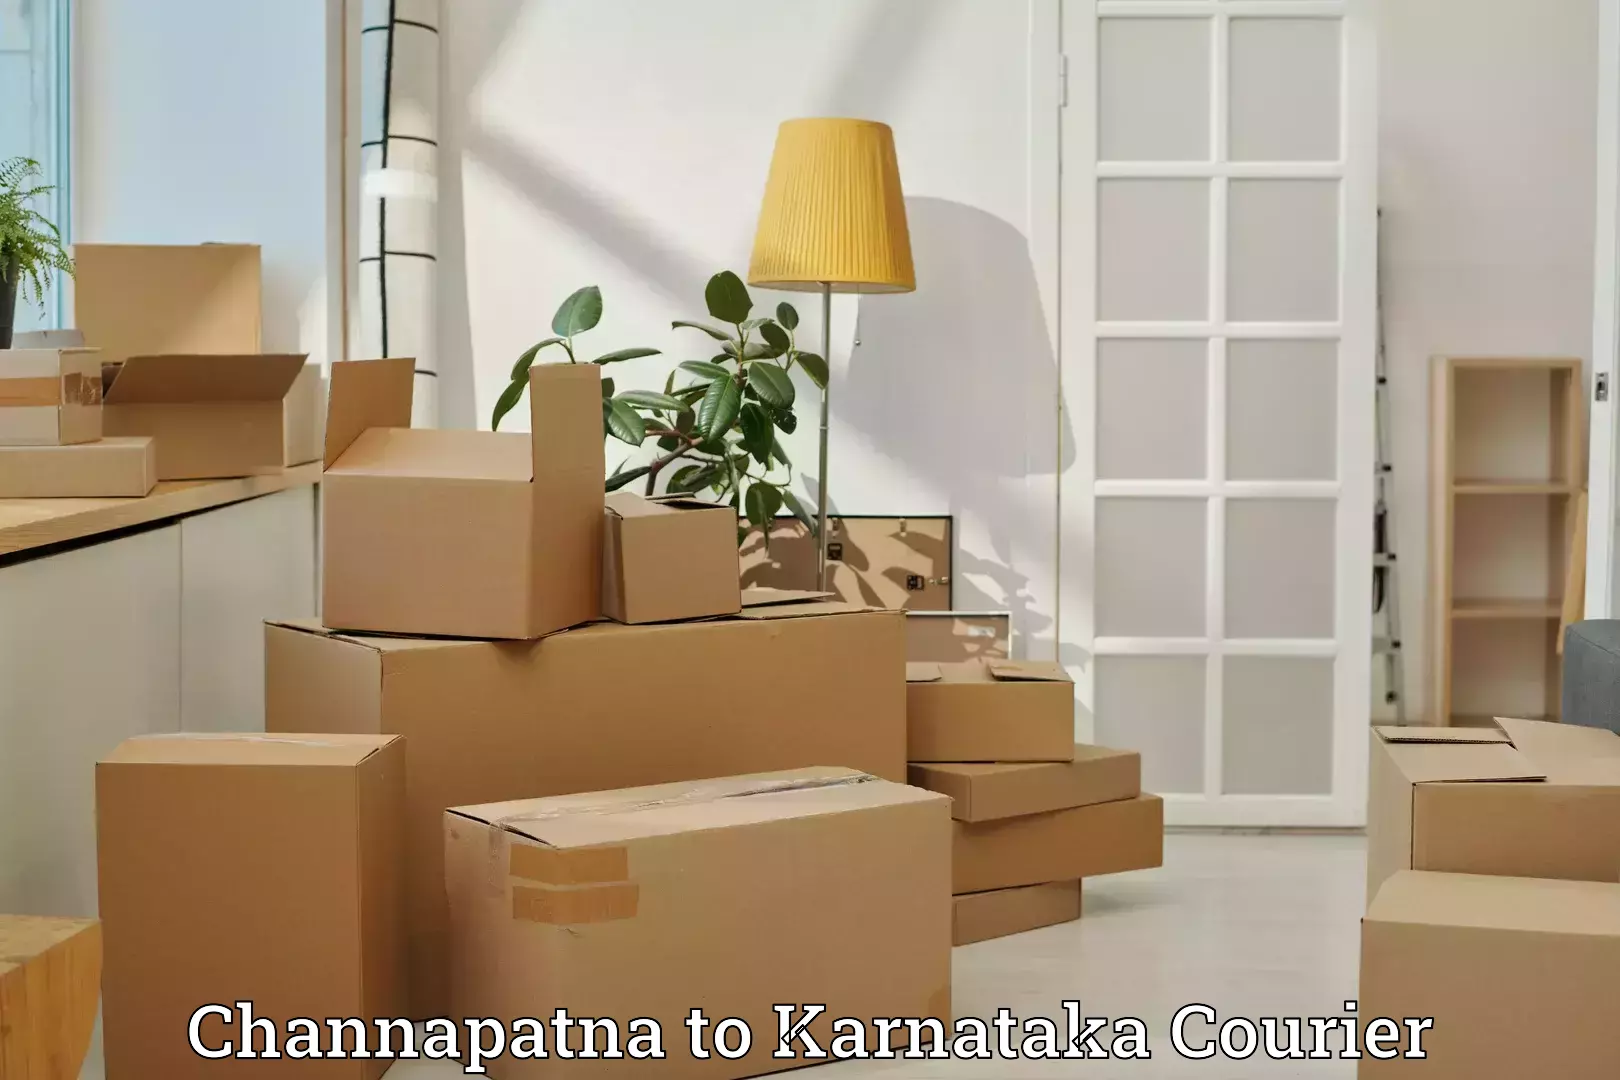 Reliable baggage delivery in Channapatna to Yellare